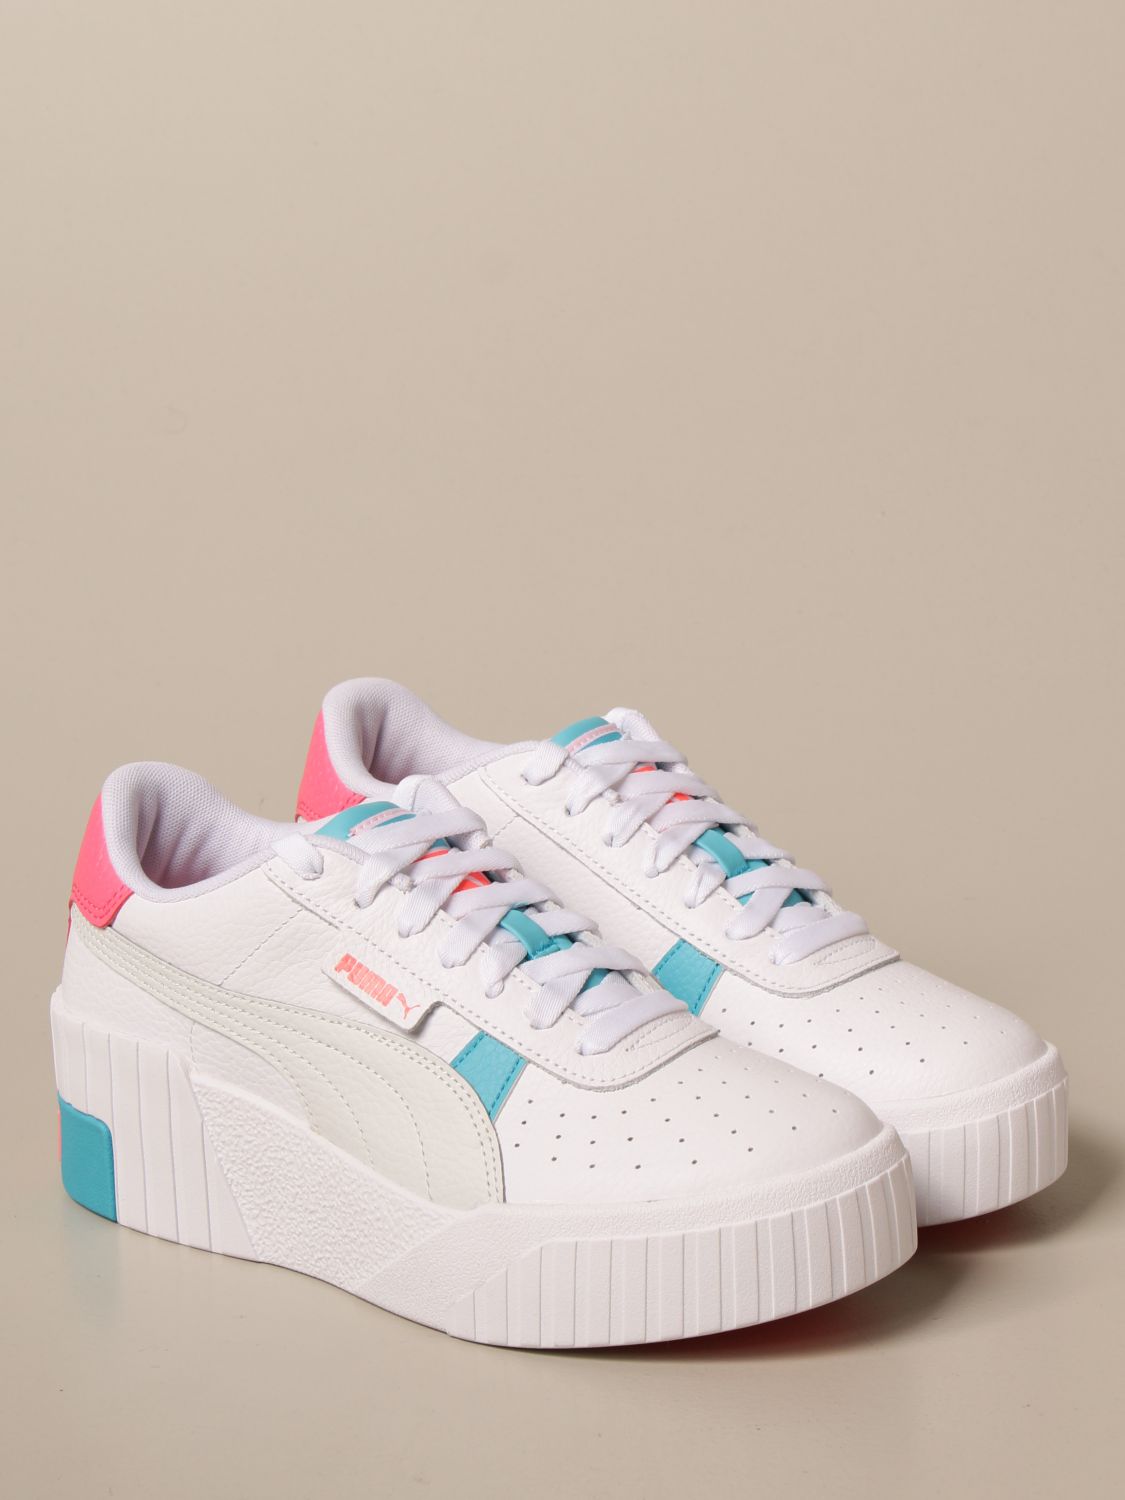 PUMA: Cali wedge sneakers in leather with logo | Sneakers Puma Women ...